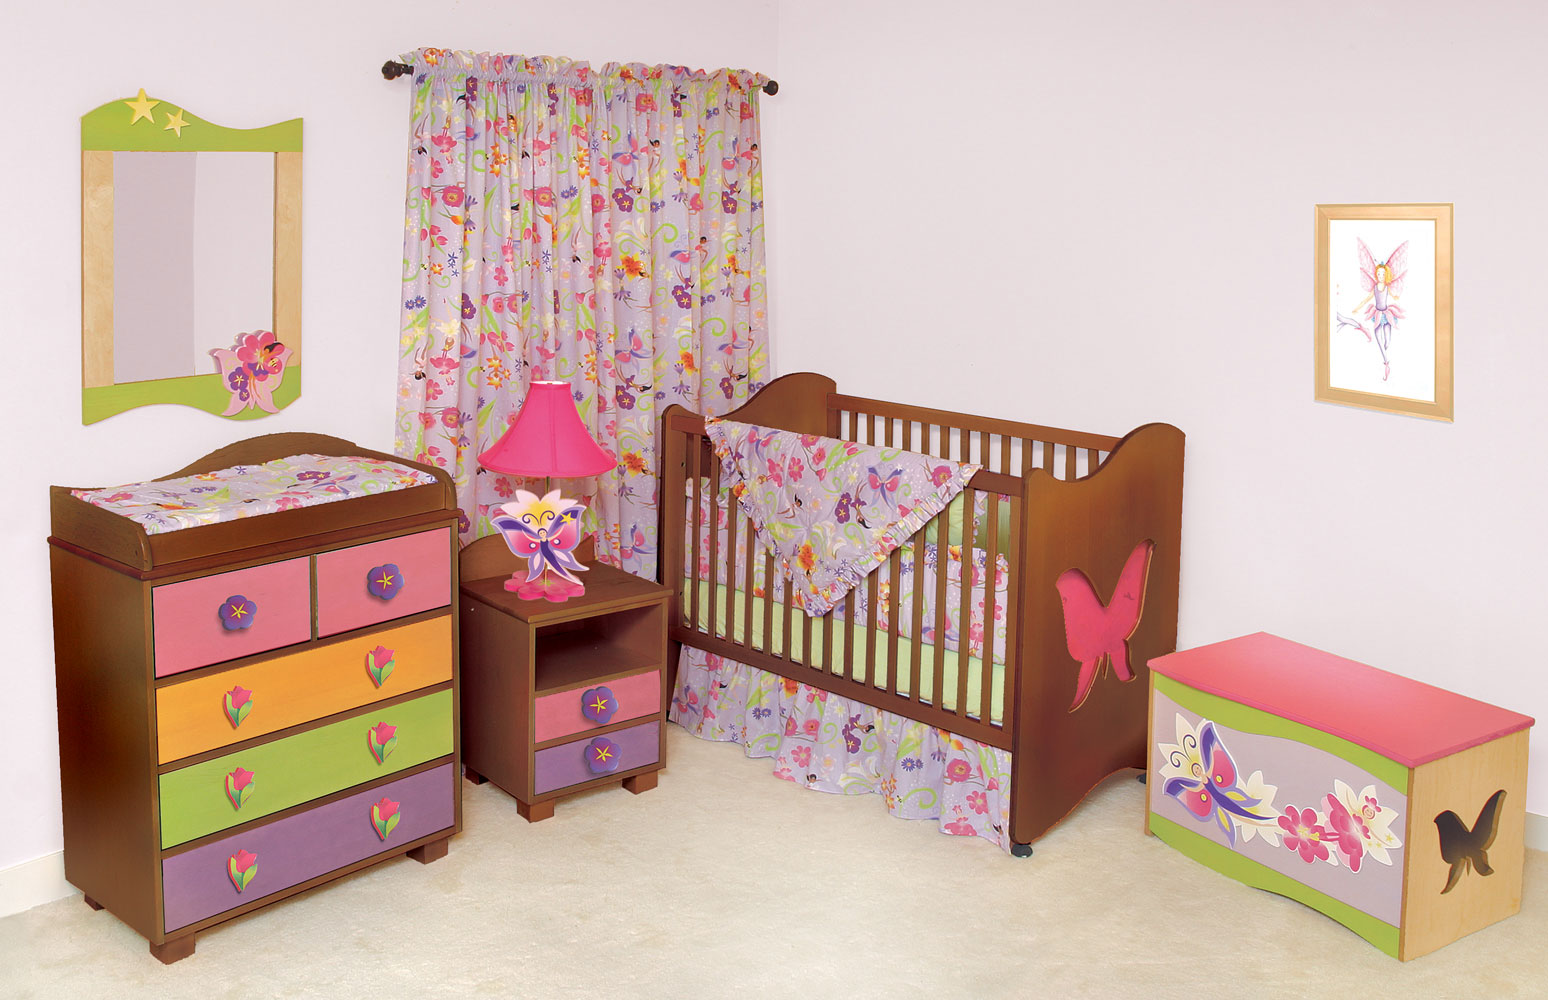 Minimalist Magic Garden Baby Furniture Sets Floral Curtain And Bedspread Viahouse Com